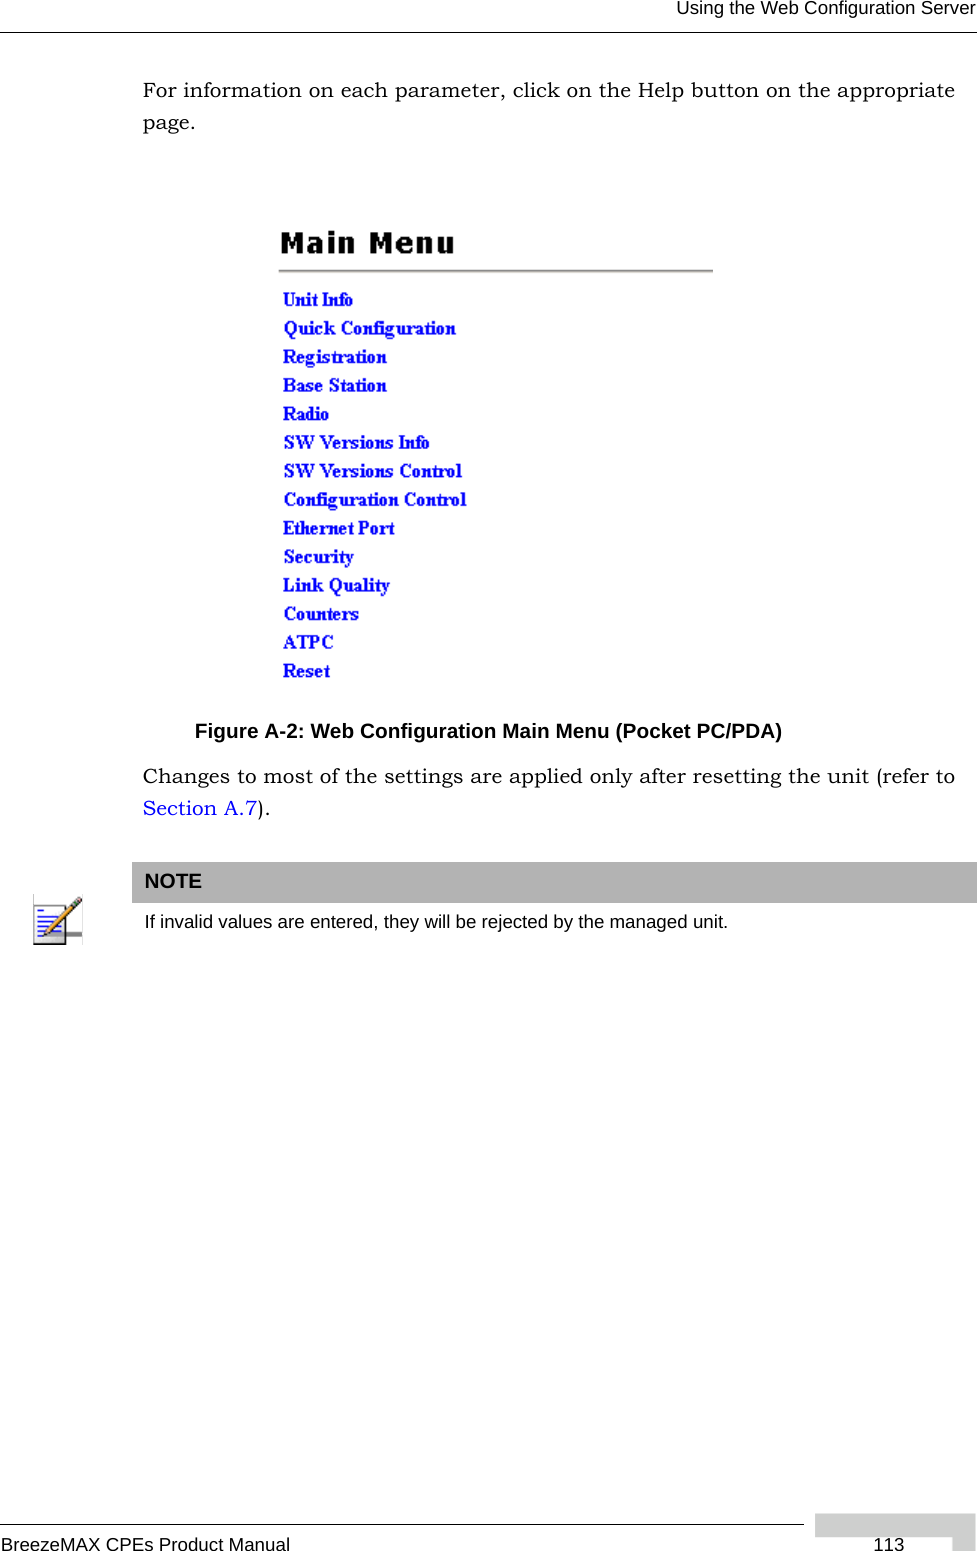 Using the Web Configuration ServerBreezeMAX CPEs Product Manual  113For information on each parameter, click on the Help button on the appropriate page.Changes to most of the settings are applied only after resetting the unit (refer to Section A.7).Figure A-2: Web Configuration Main Menu (Pocket PC/PDA)NOTEIf invalid values are entered, they will be rejected by the managed unit.